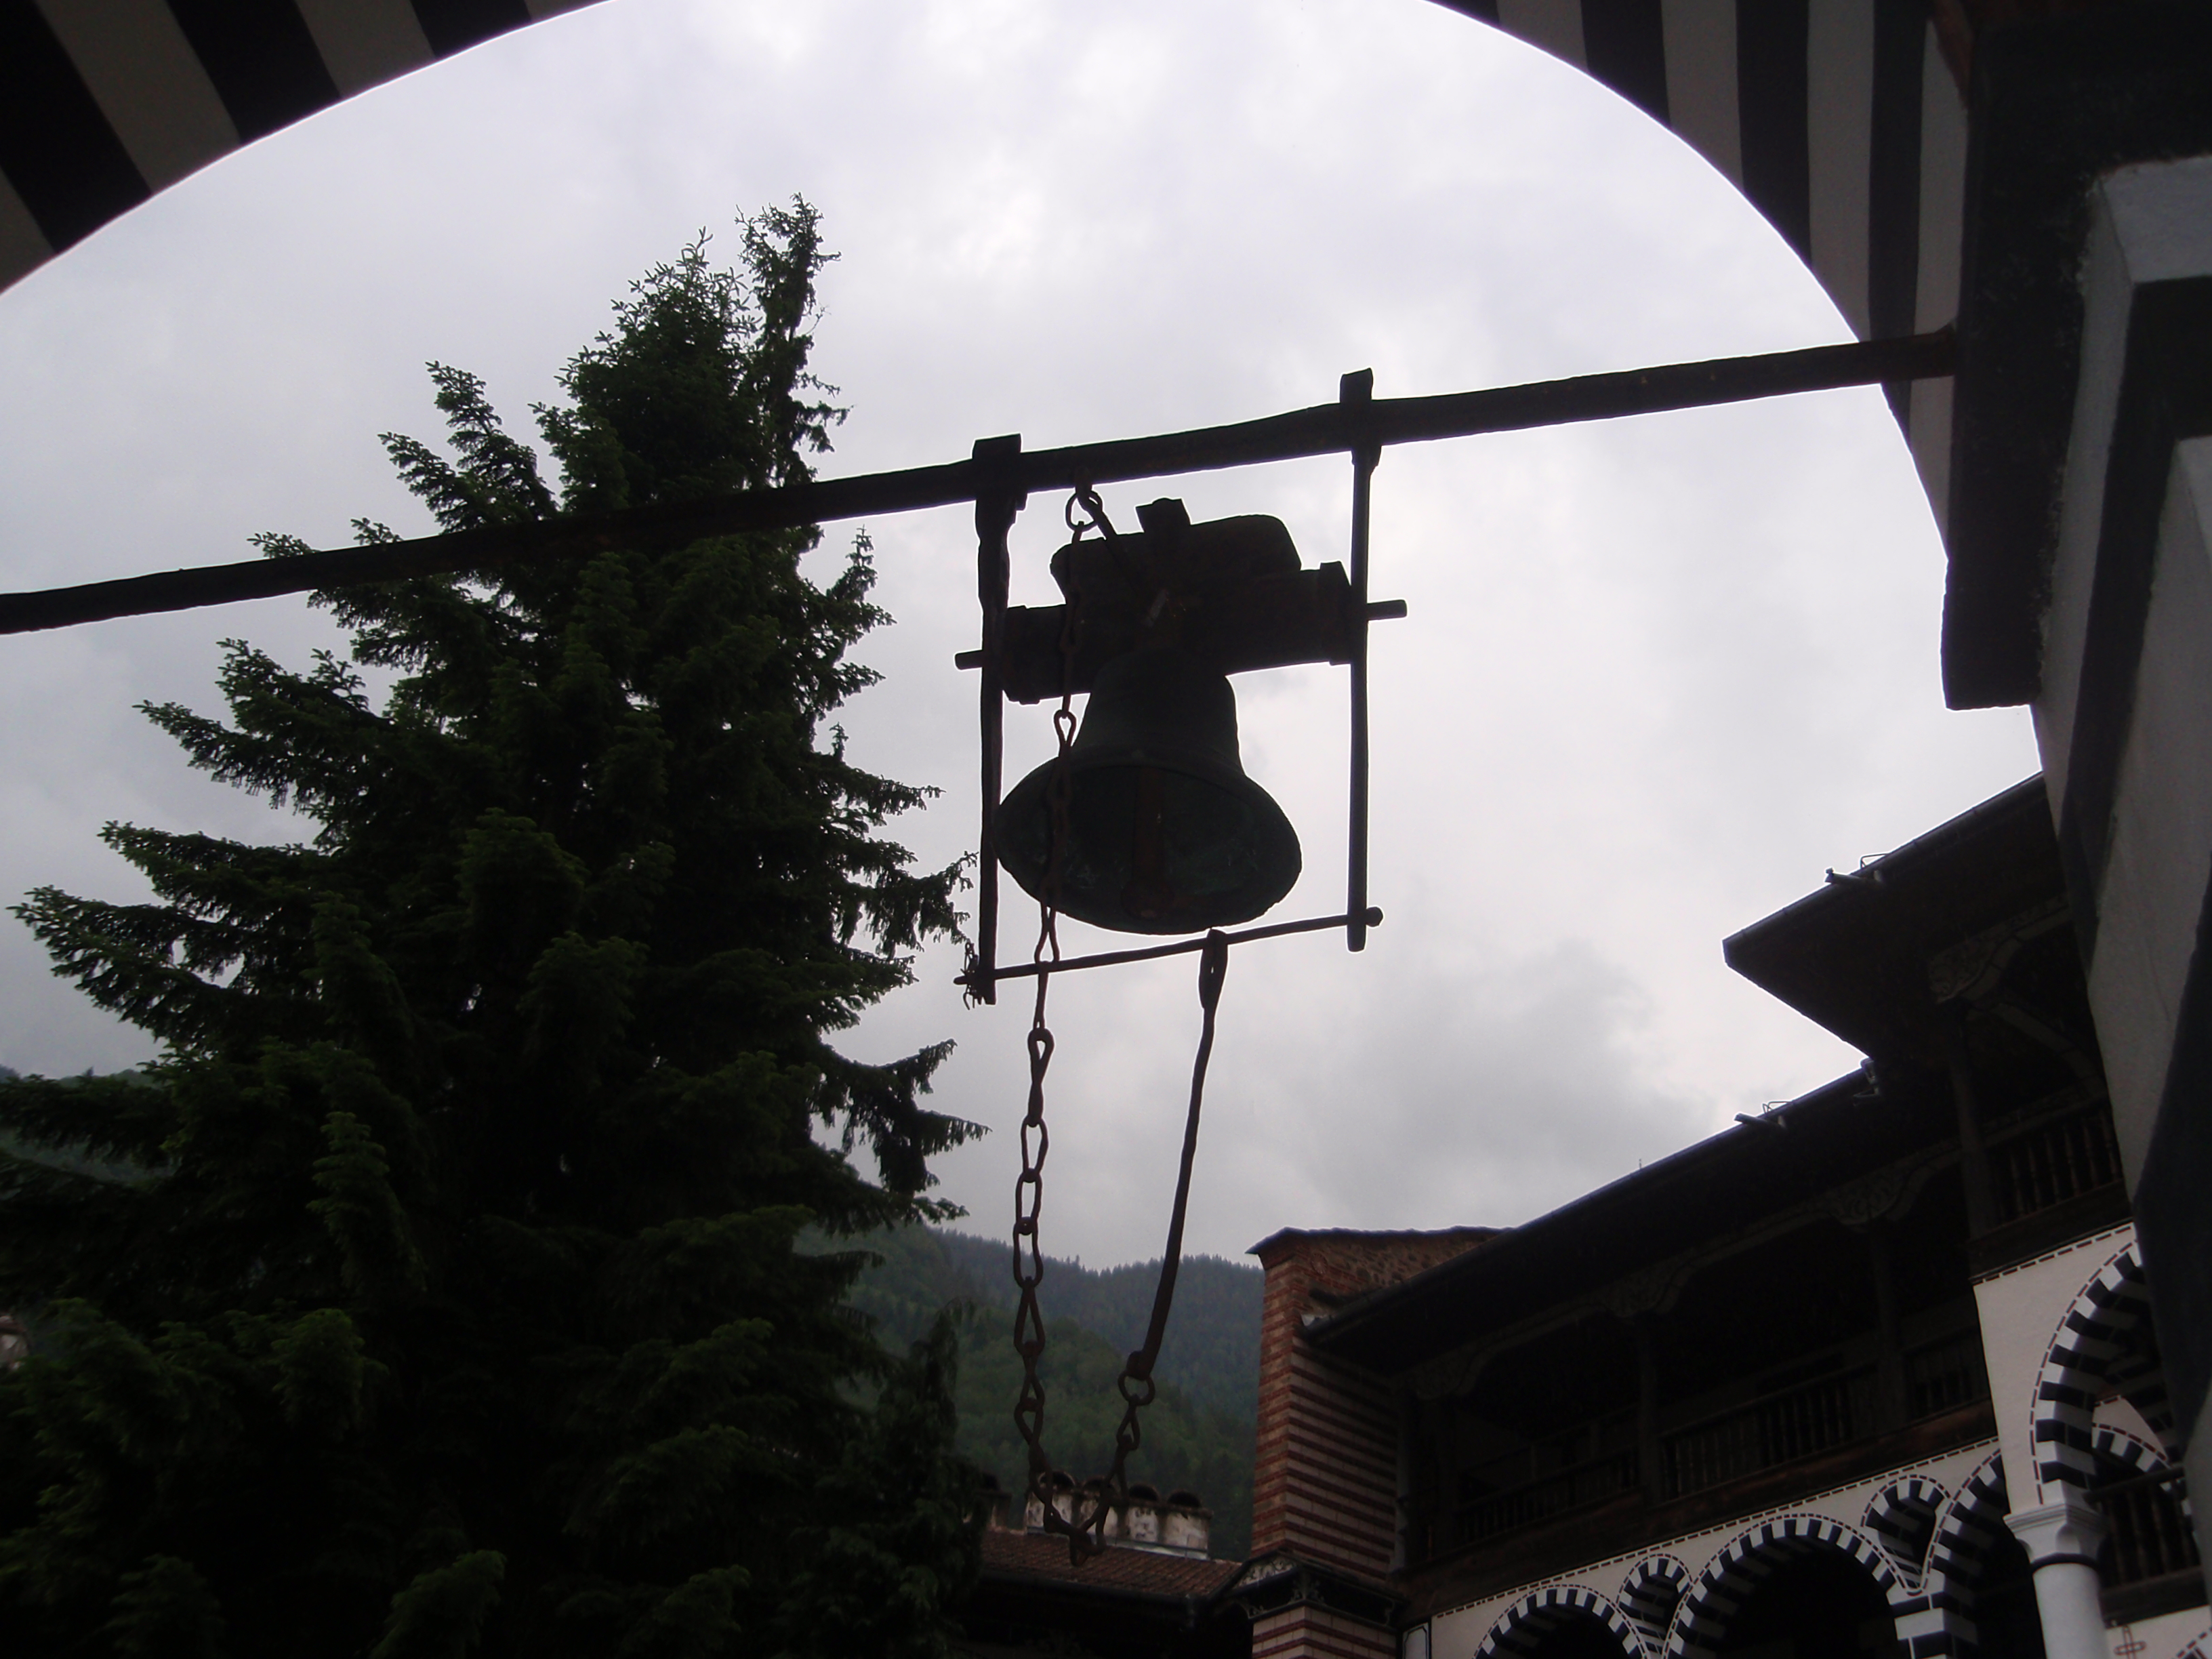 The yard bell at the Rila Monastery in Bulgaria.